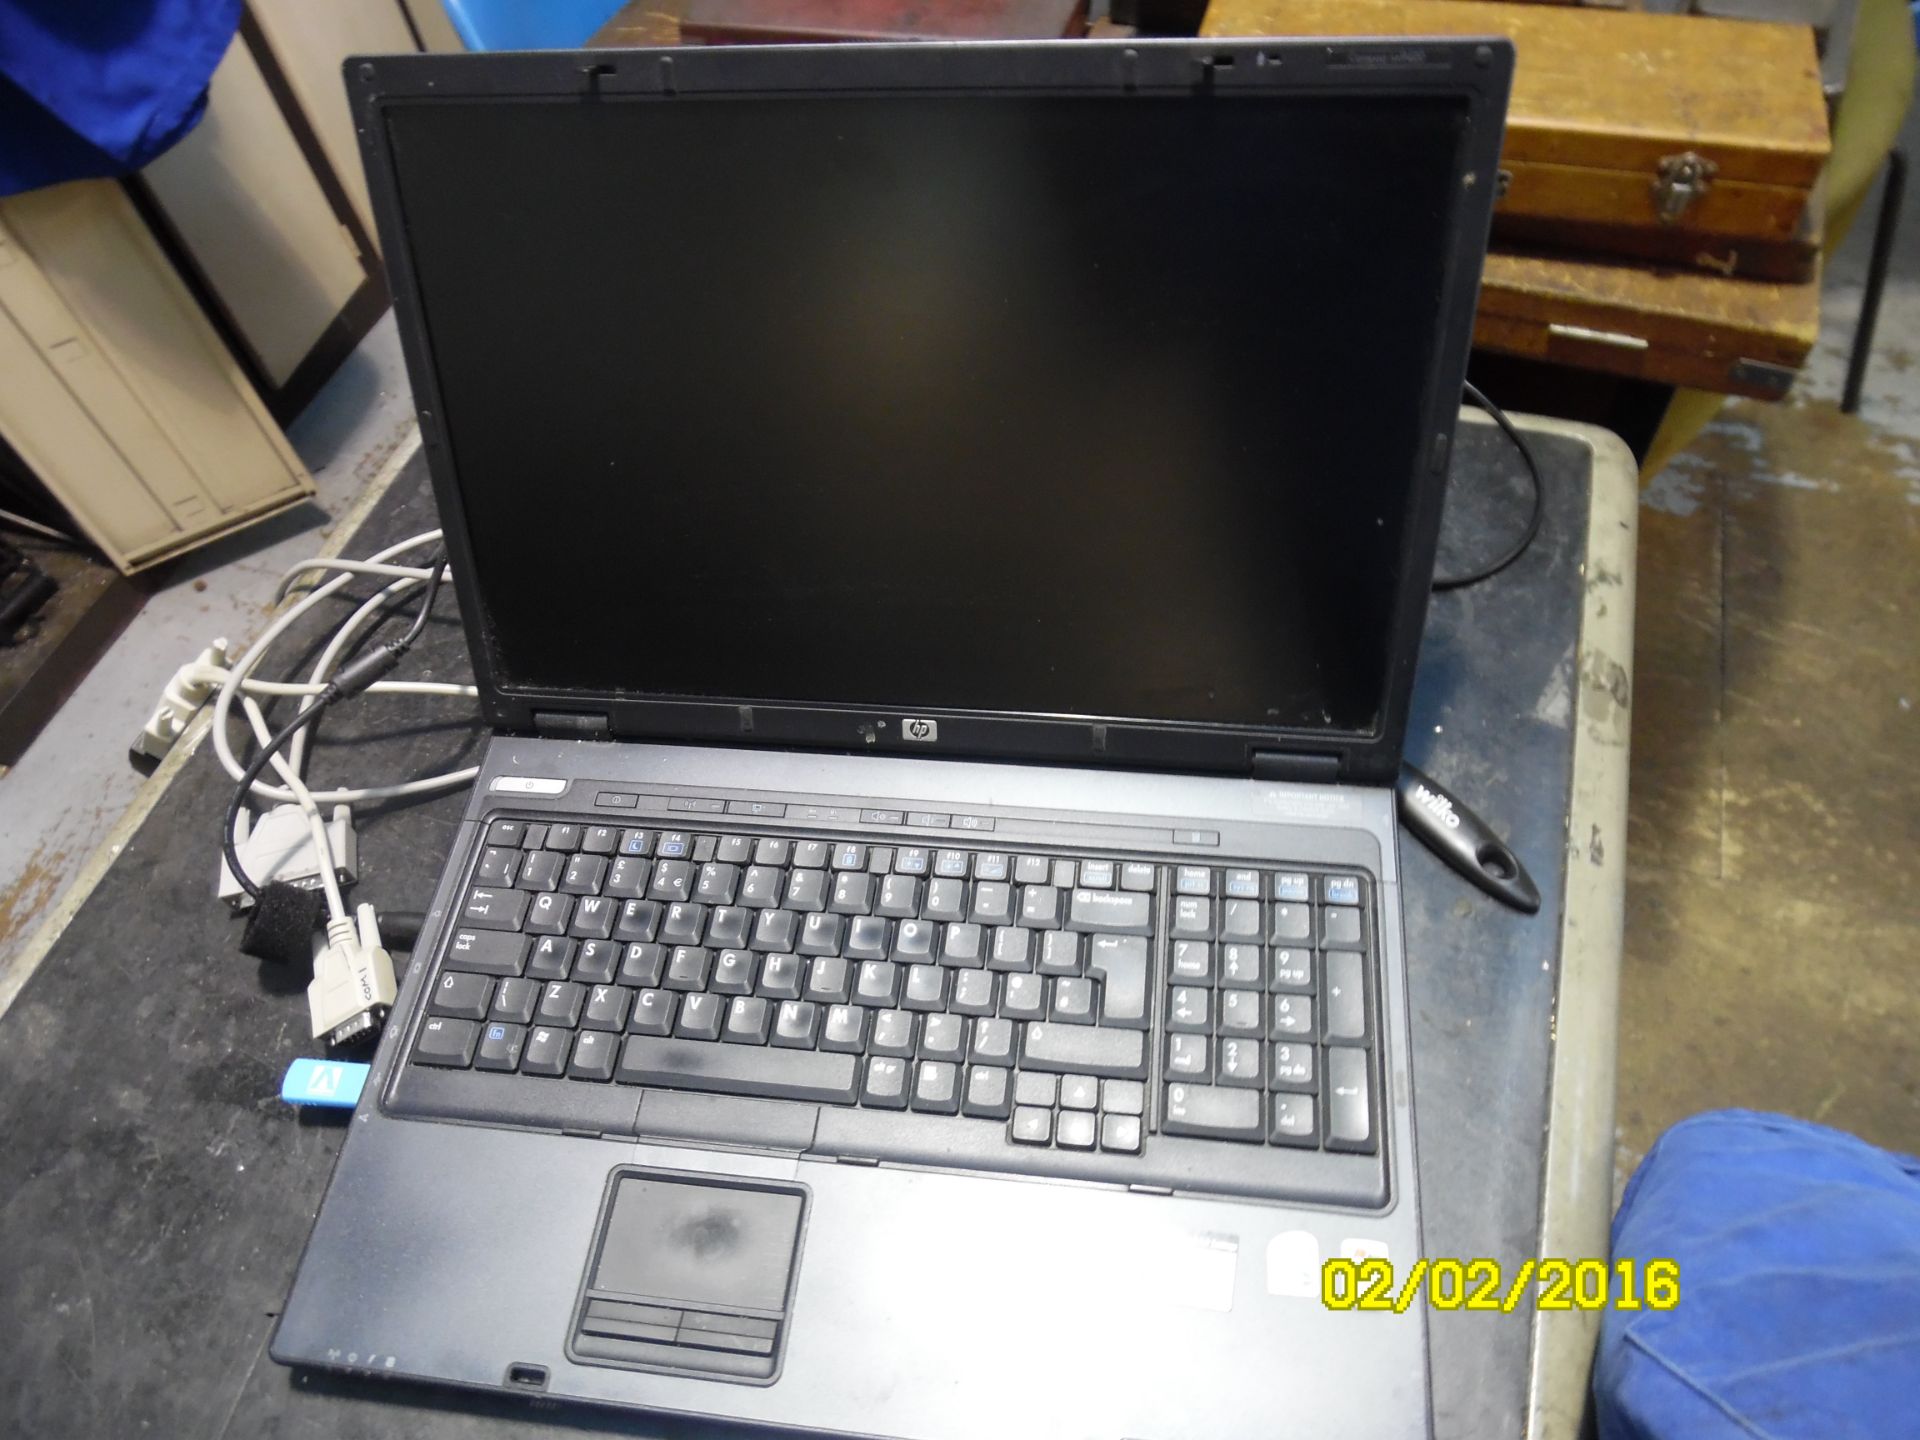 HP Compaq NX9420 Centrino Duo laptop computer, loaded with CAD/CAM software package